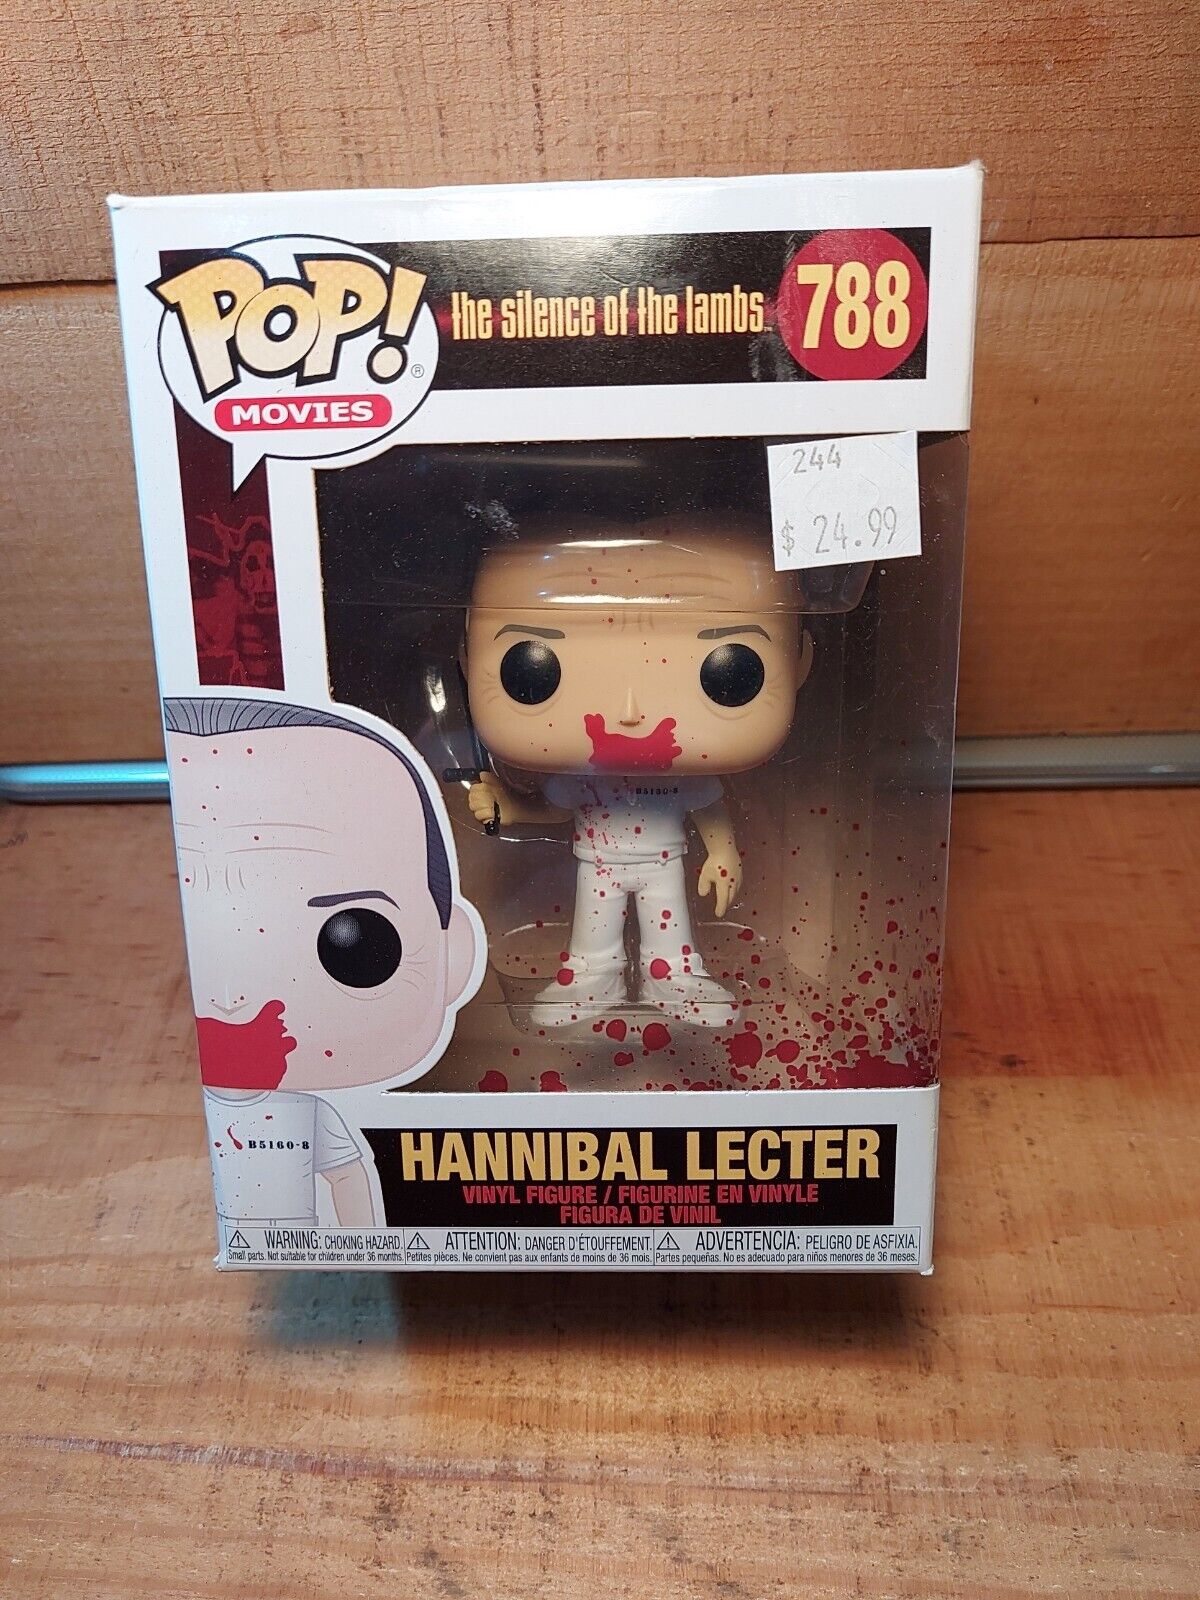 FUNKO POP HANNIBAL LECTER THE SILENCE OF THE LAMBS 788 Figure New Sealed Bx3